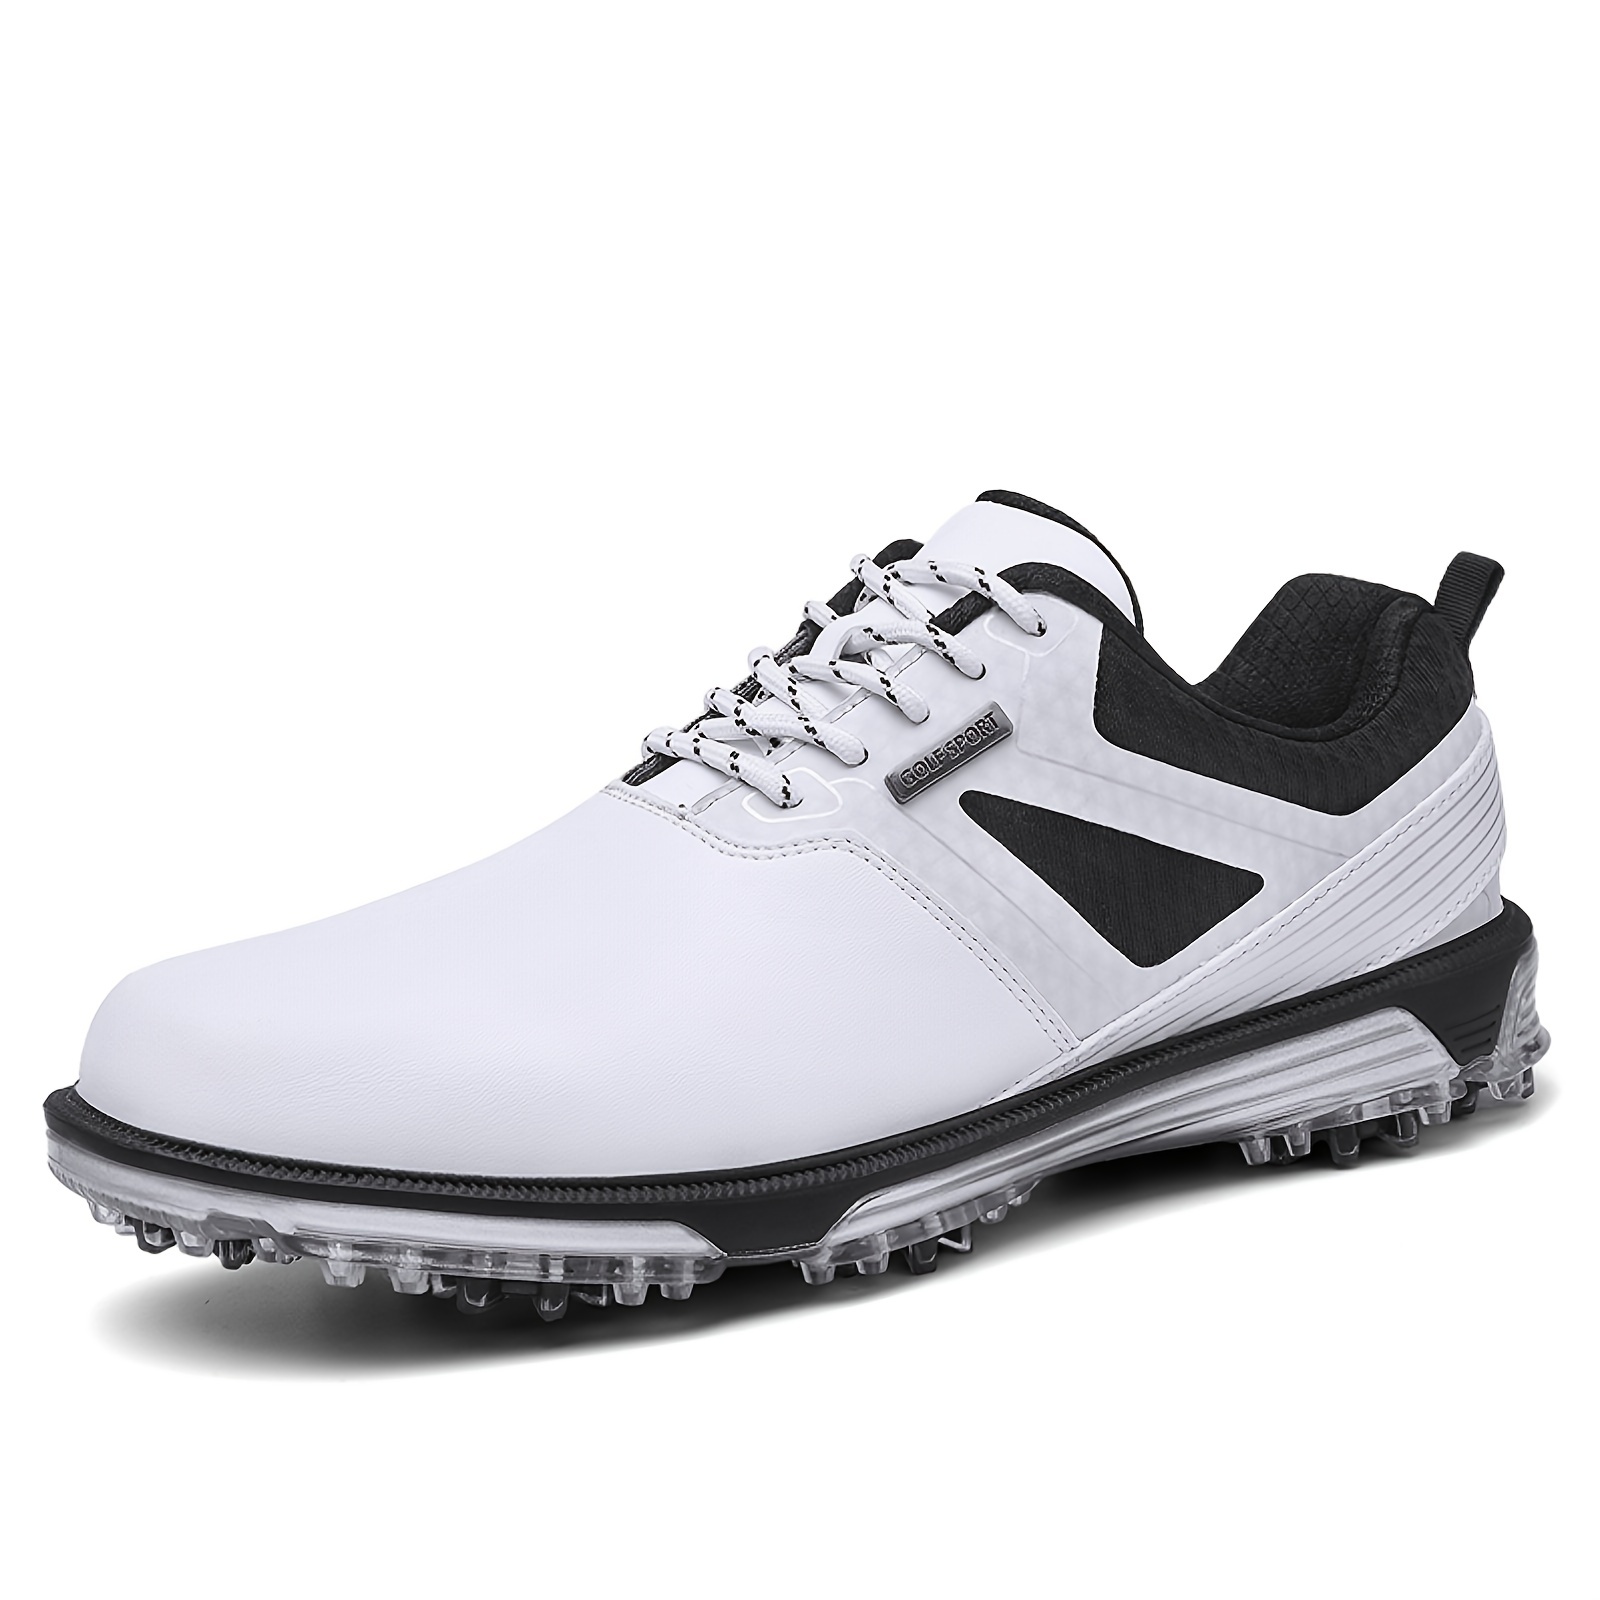 Men's Professional 9 Spikes Golf Shoes, Solid Comfy Non Slip Lace Up  Sneakers For Golf Sport Activities